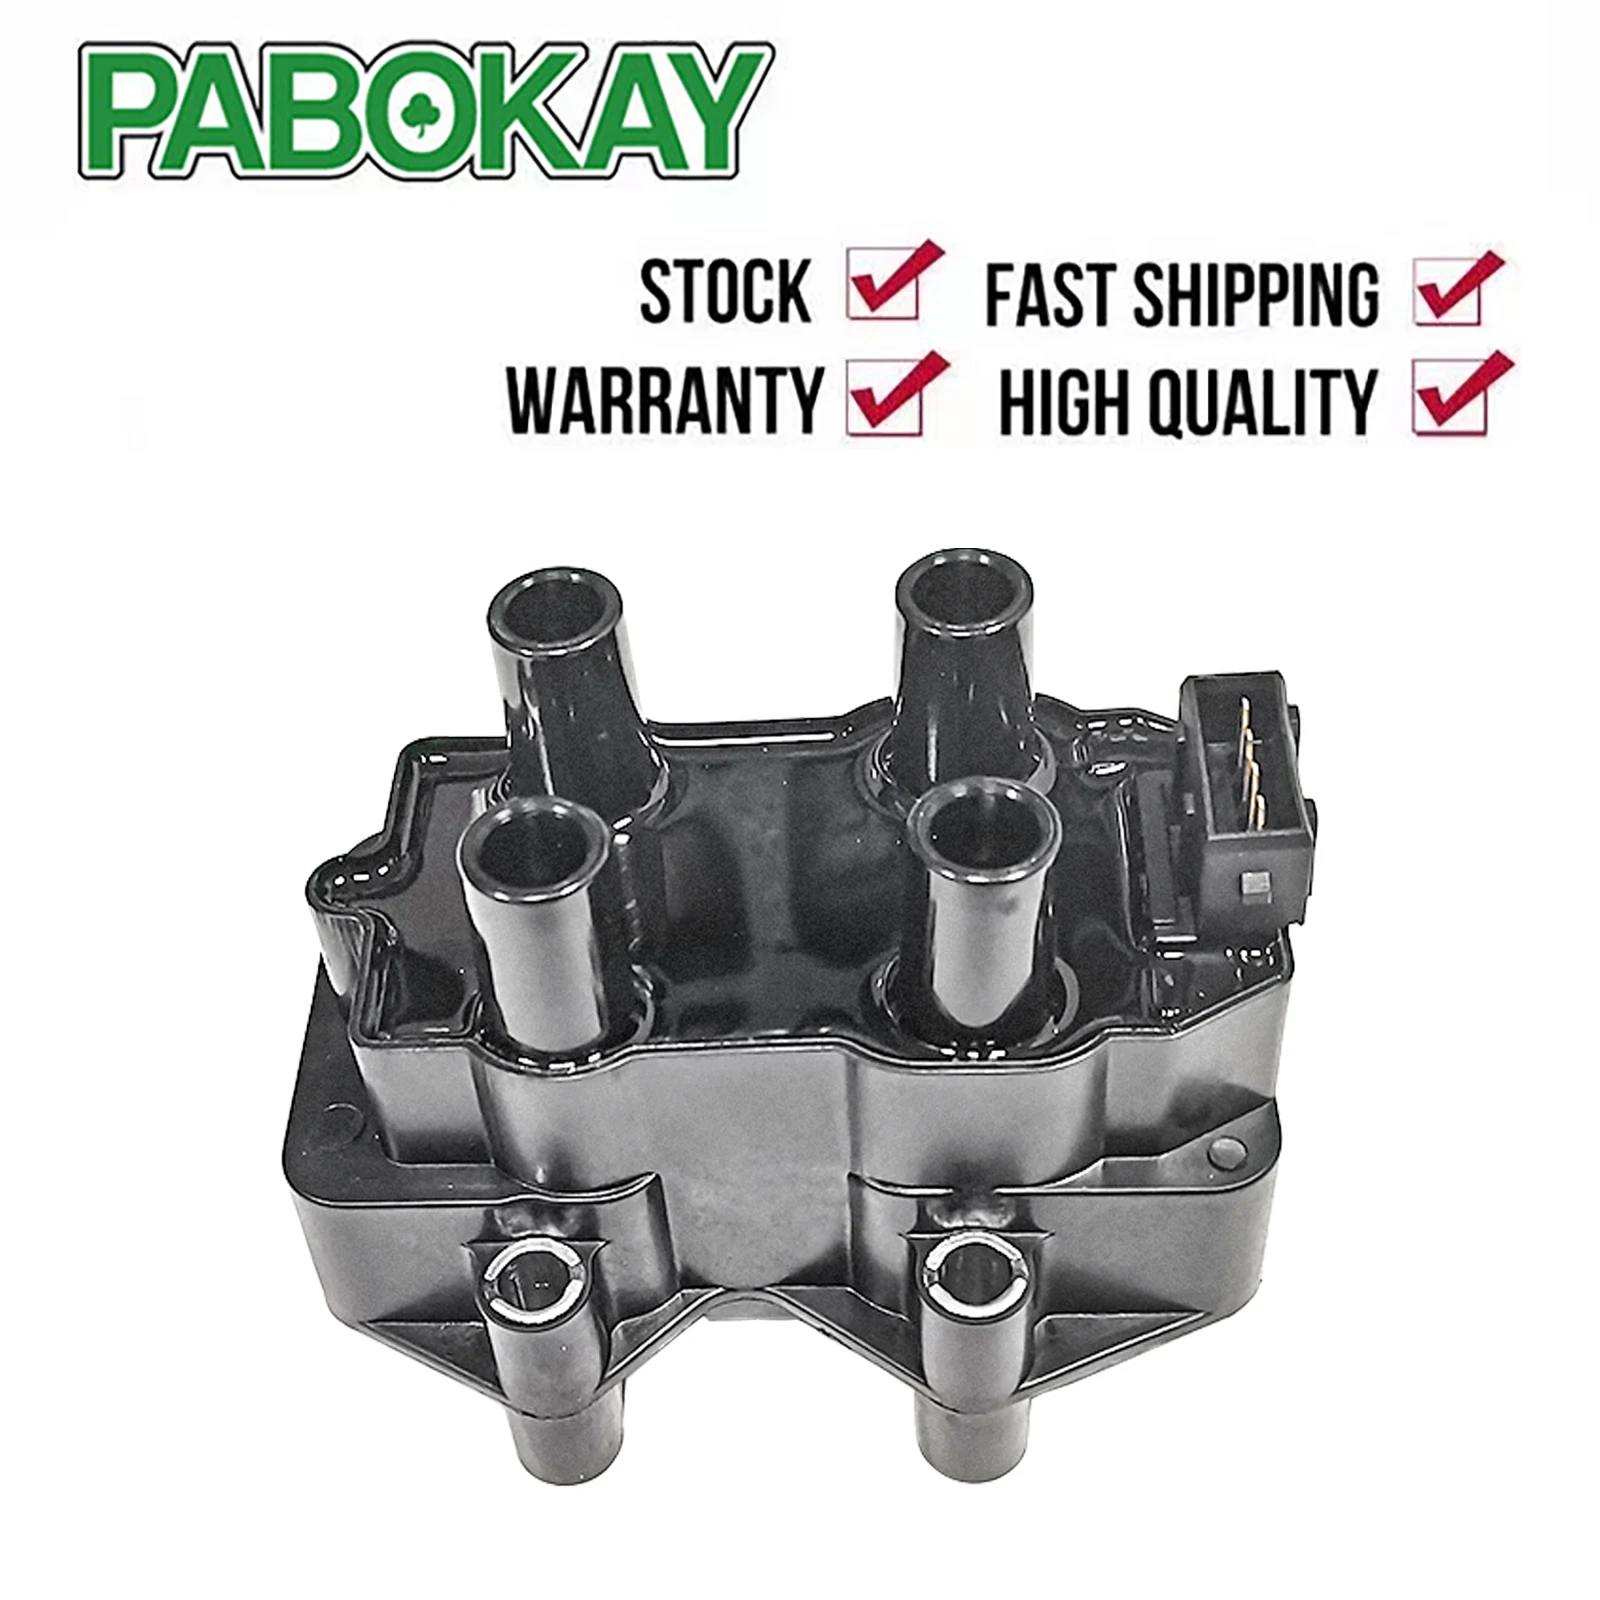 

597048 597070 5970.48 5970.70 96228897 9607054 5970.60 For PEUGEOT 106 205 306 405 406 605 806 BOXER EXPERT IGNITION COIL 1996-